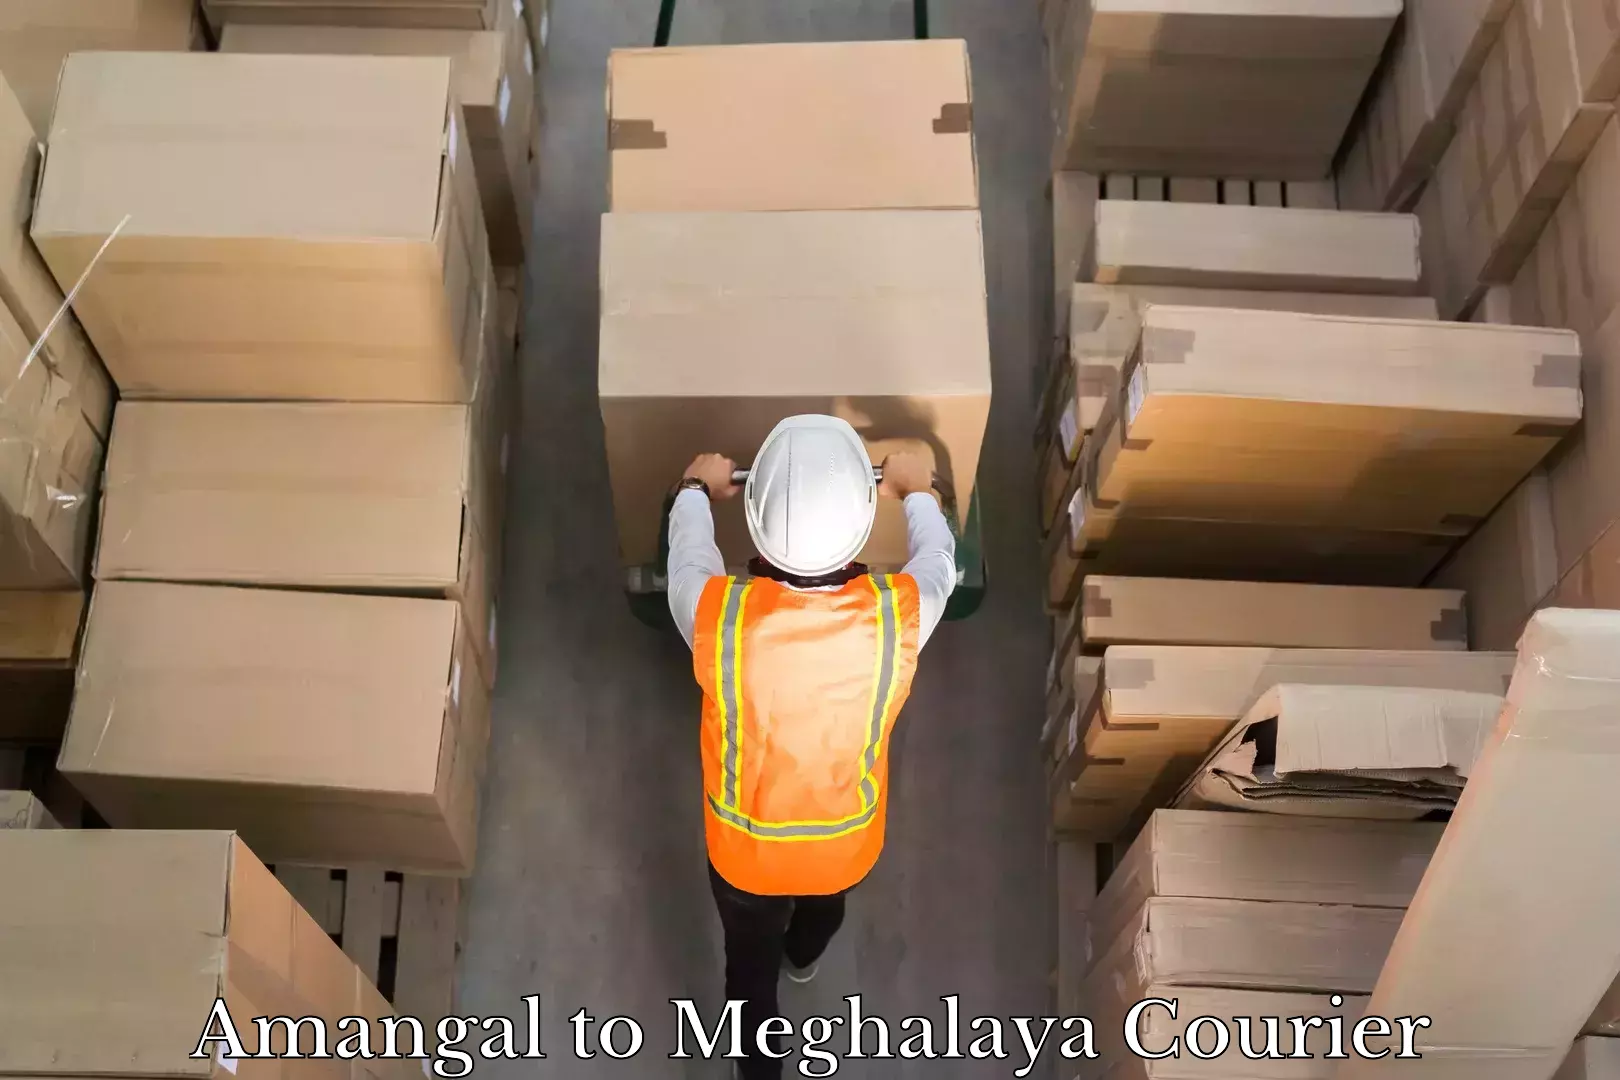 State-of-the-art courier technology Amangal to Meghalaya